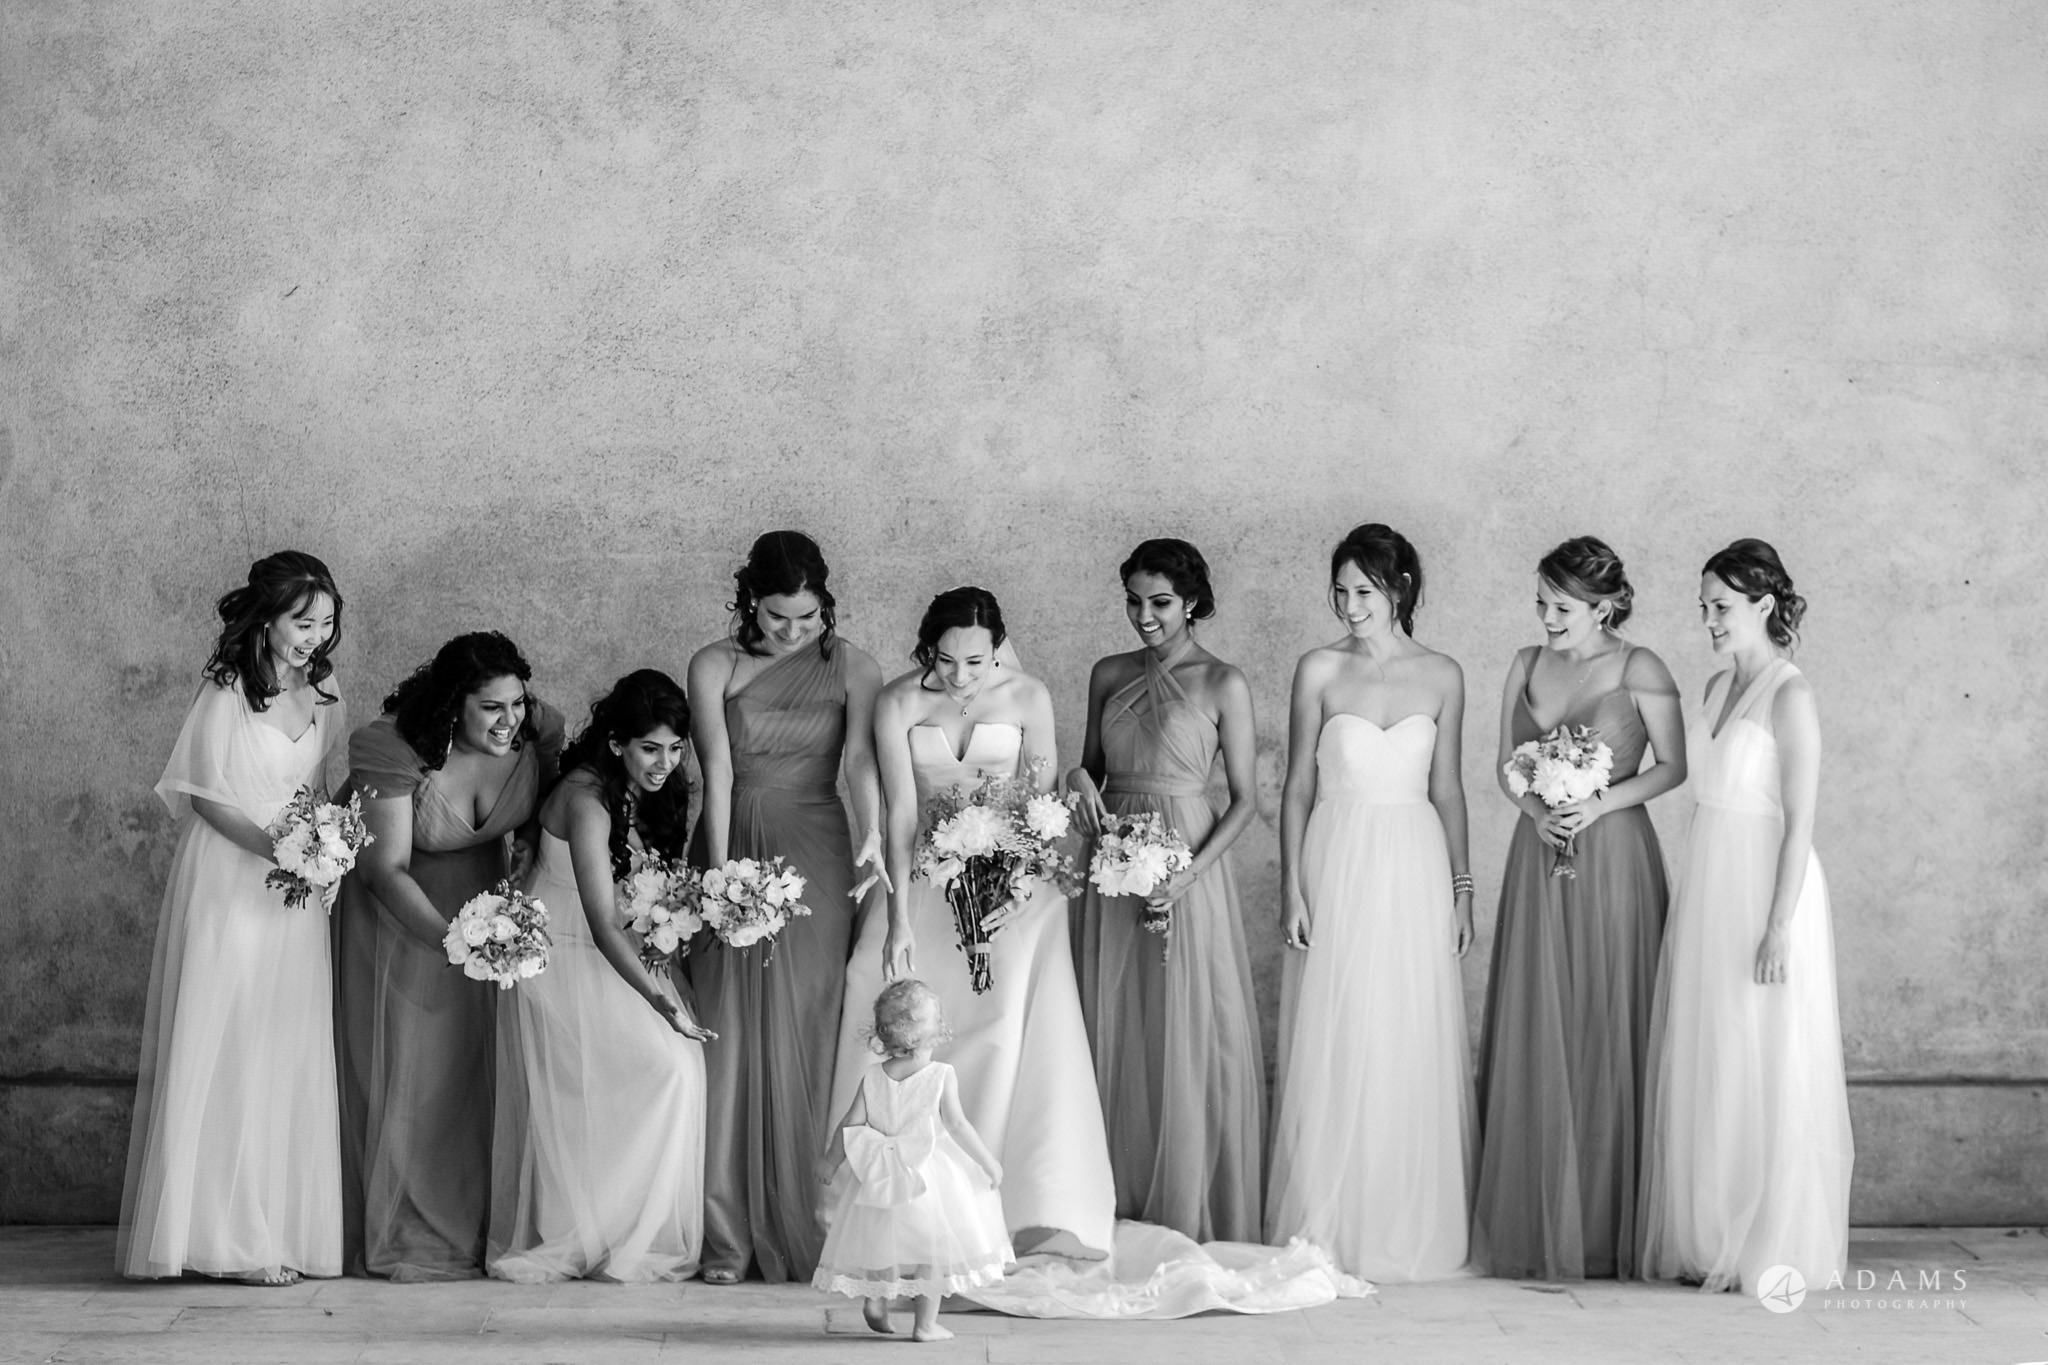 group photo of the bride and bridesmaids